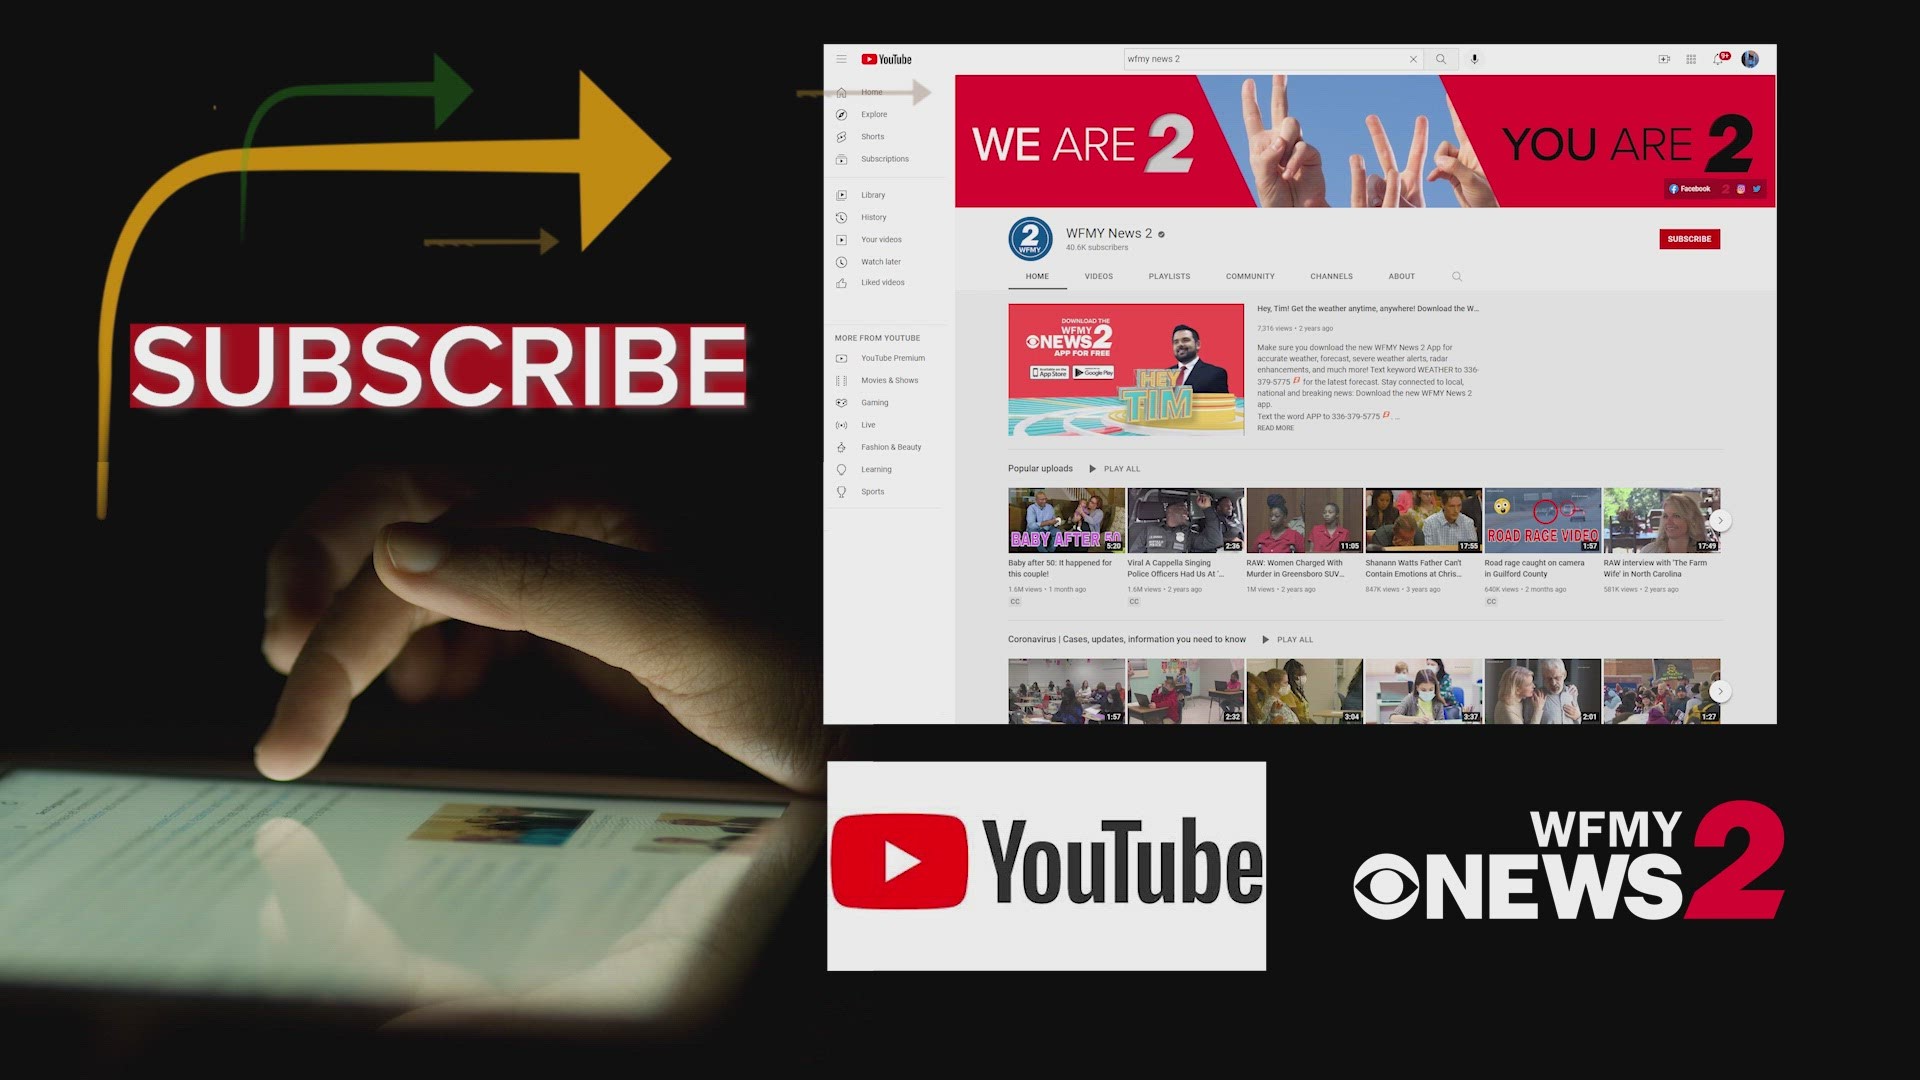 Subscribe to our YouTube channel and watch WFMY News 2 on your own time!